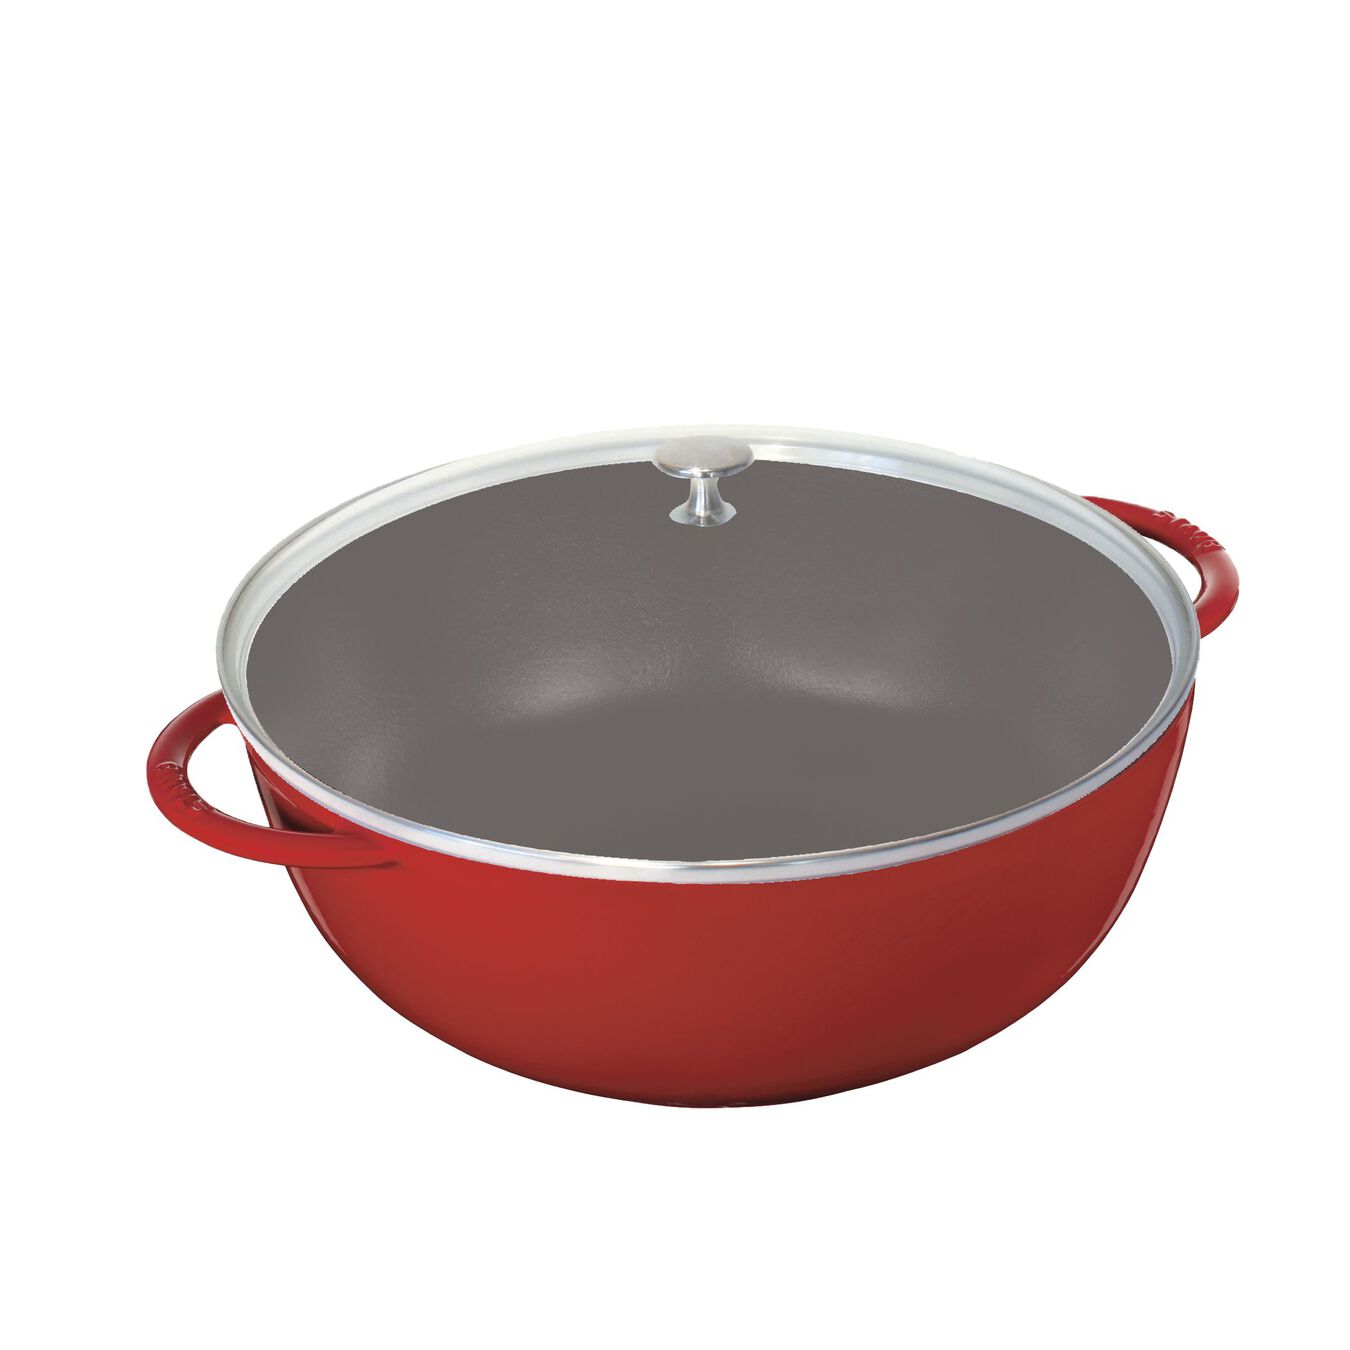 32 cm / 12.5 inch cast iron Wok, cherry - Visual Imperfections,,large 3